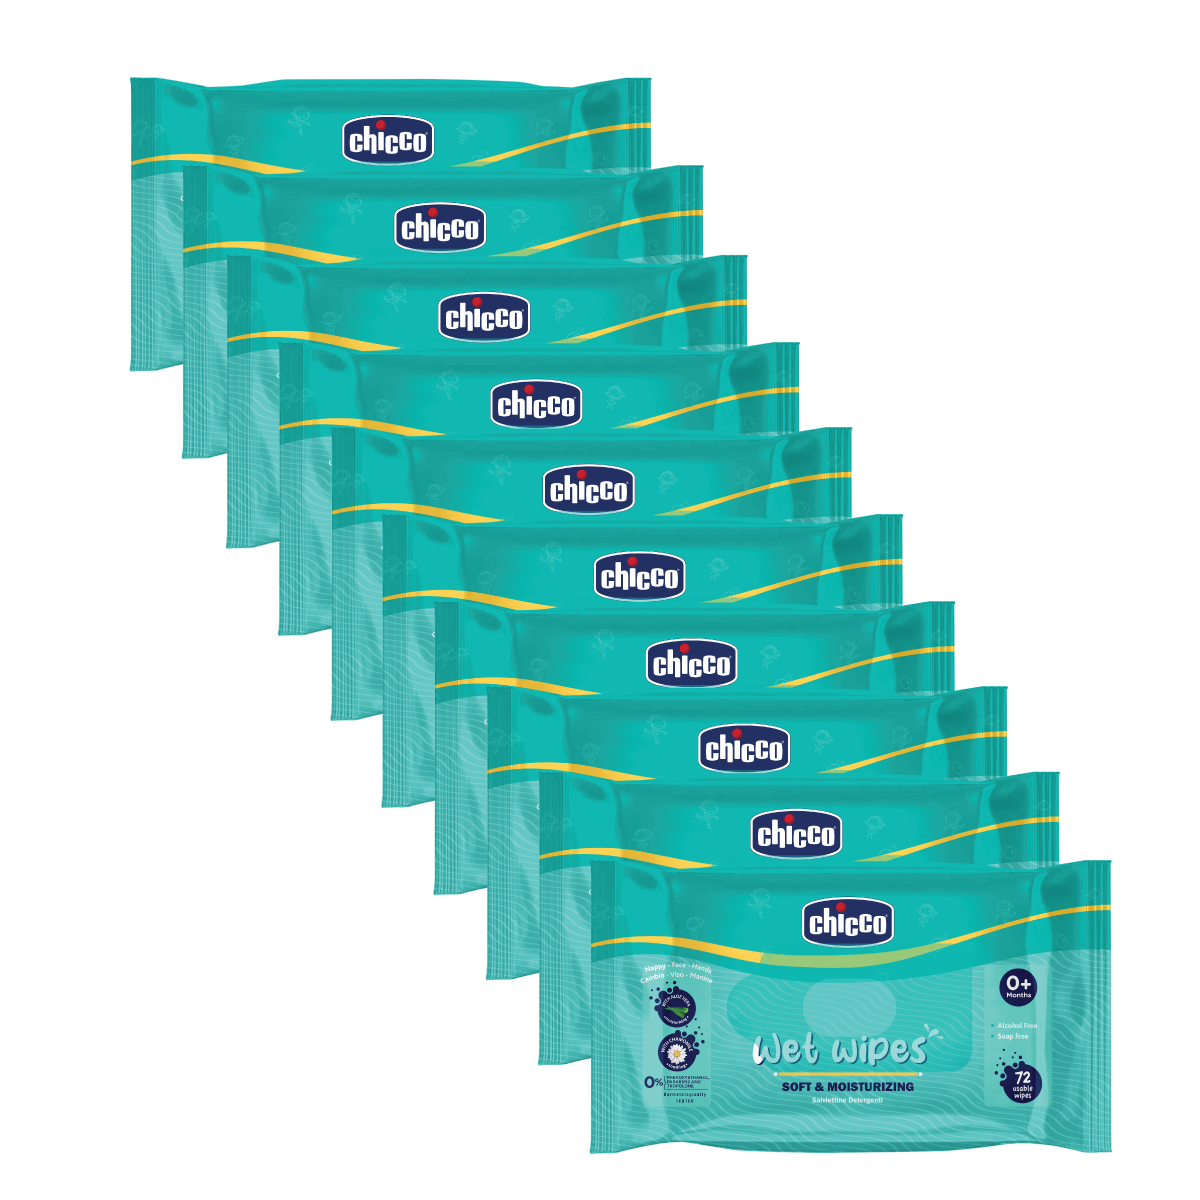 Chicco Wetwipes Pack of 3-720 PCS